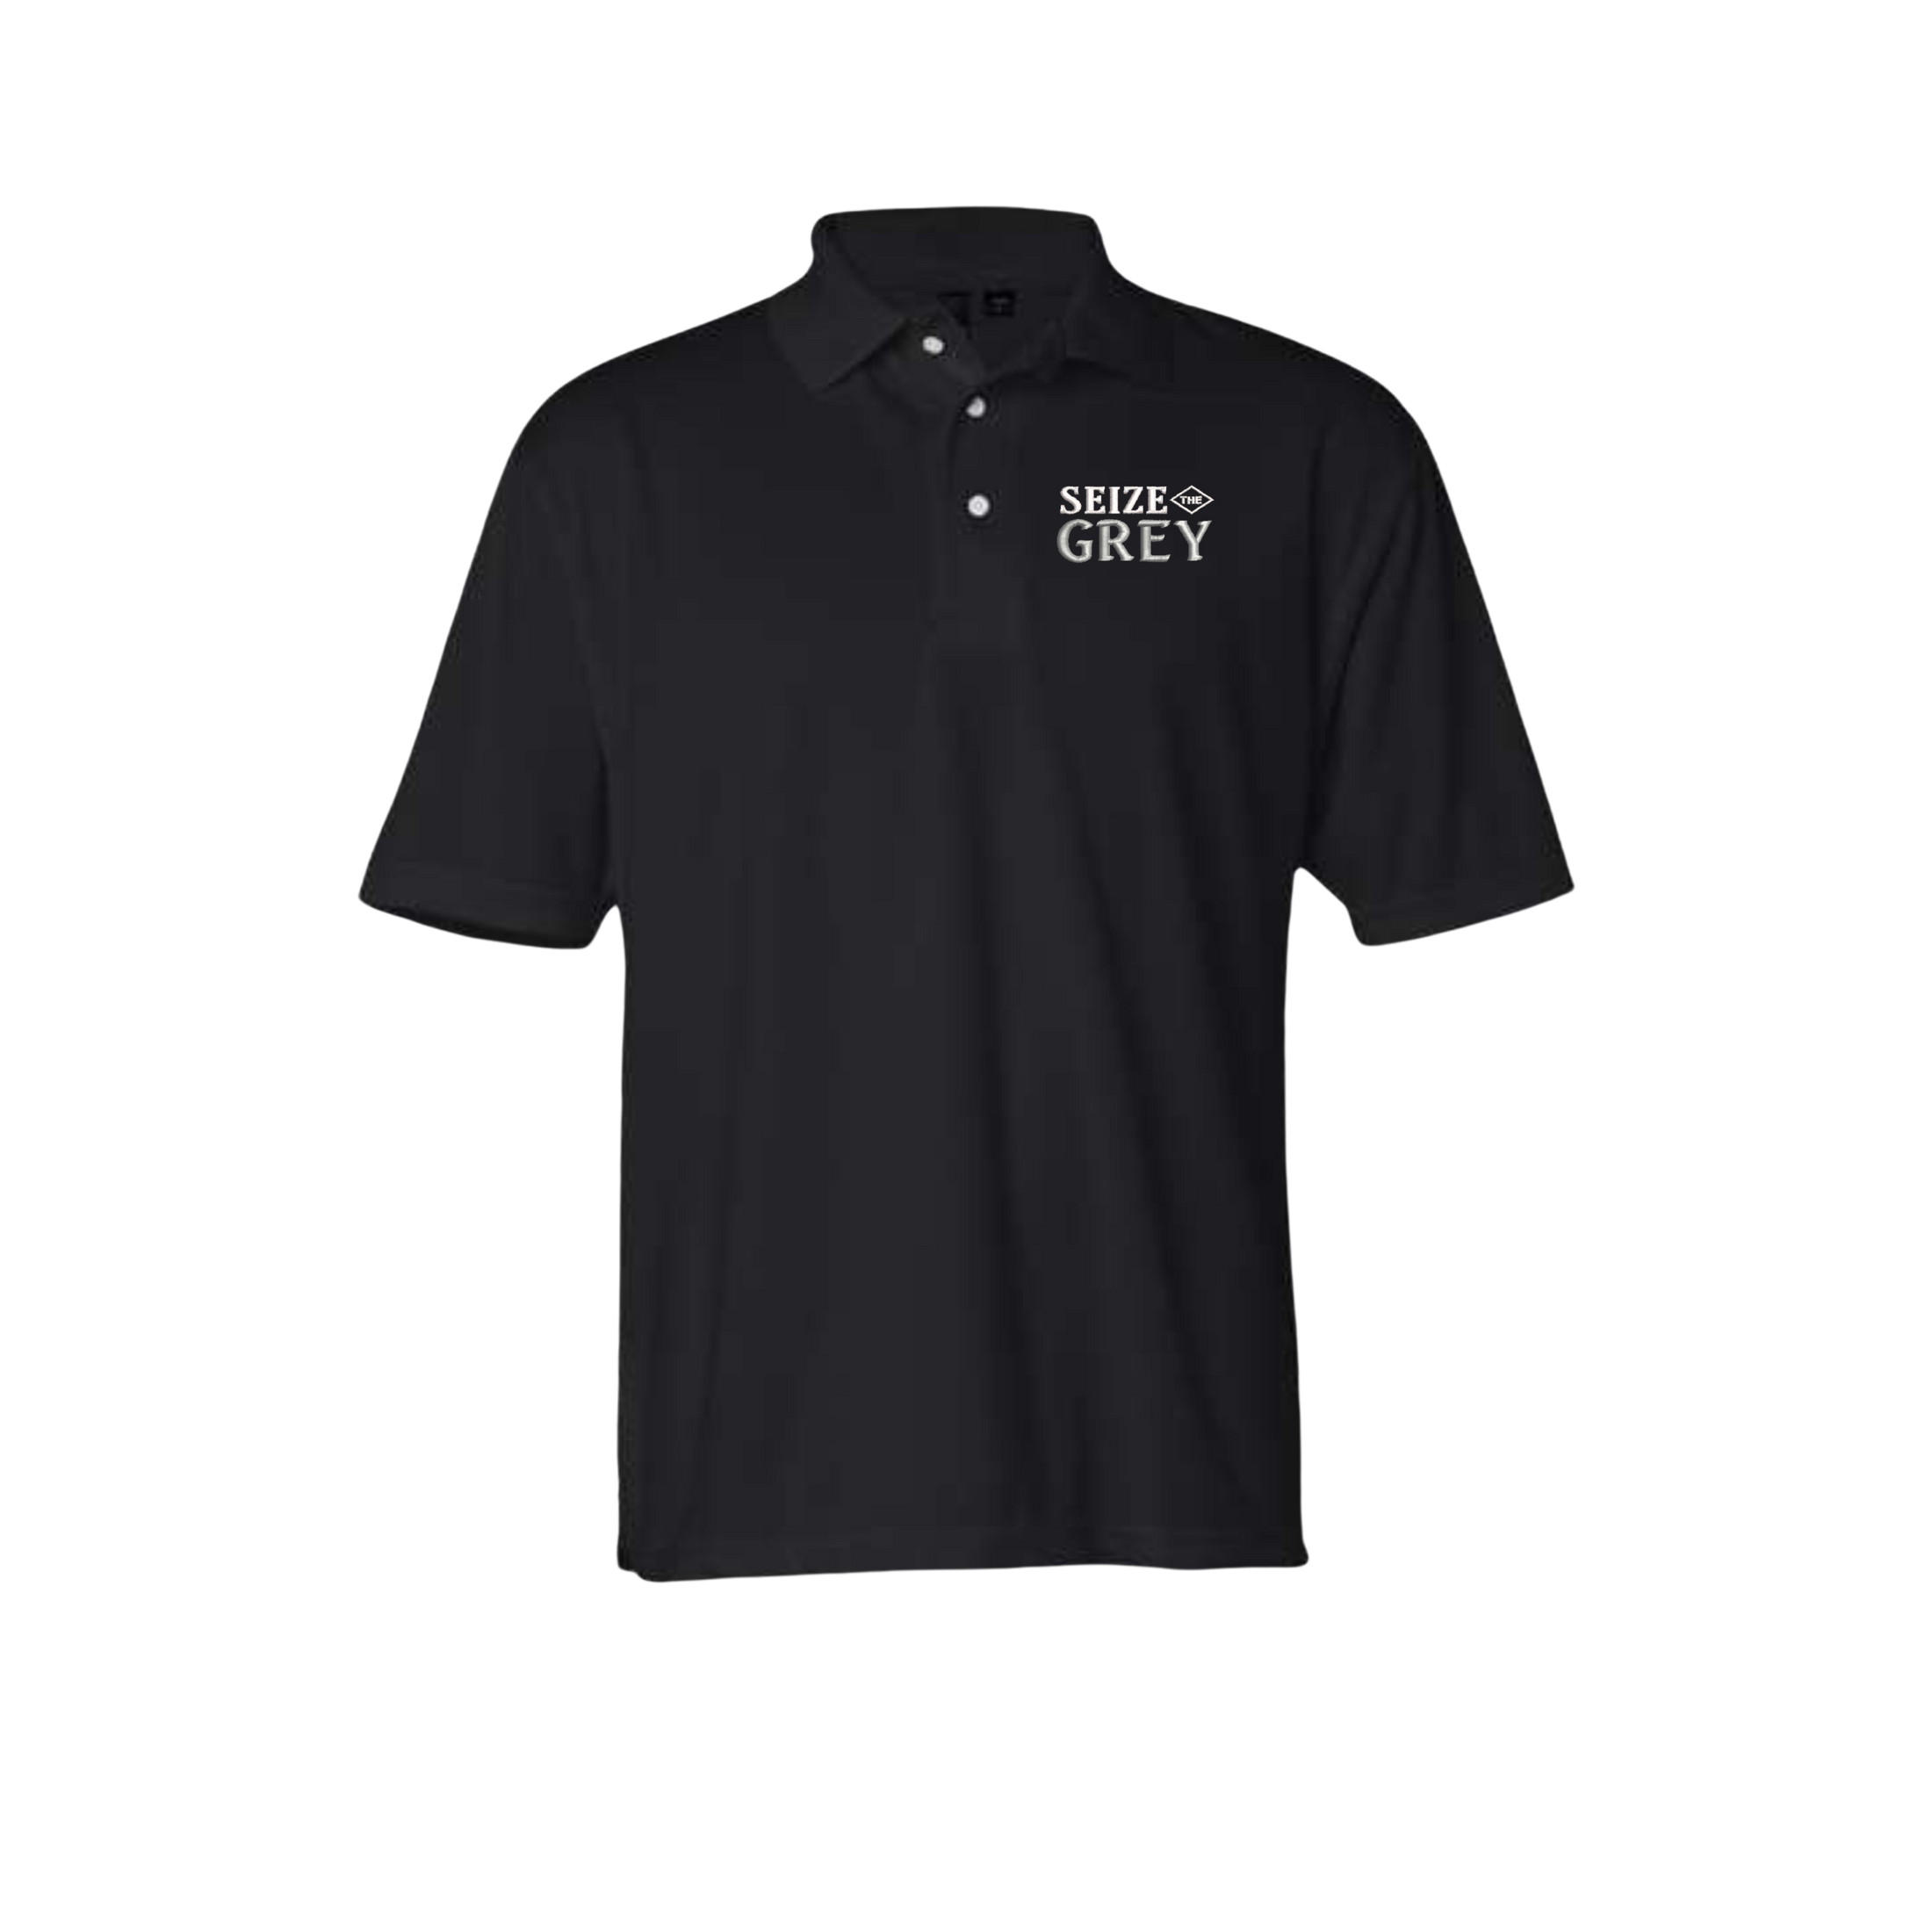 Seize the Grey Men's Embroidered Polo Shirt